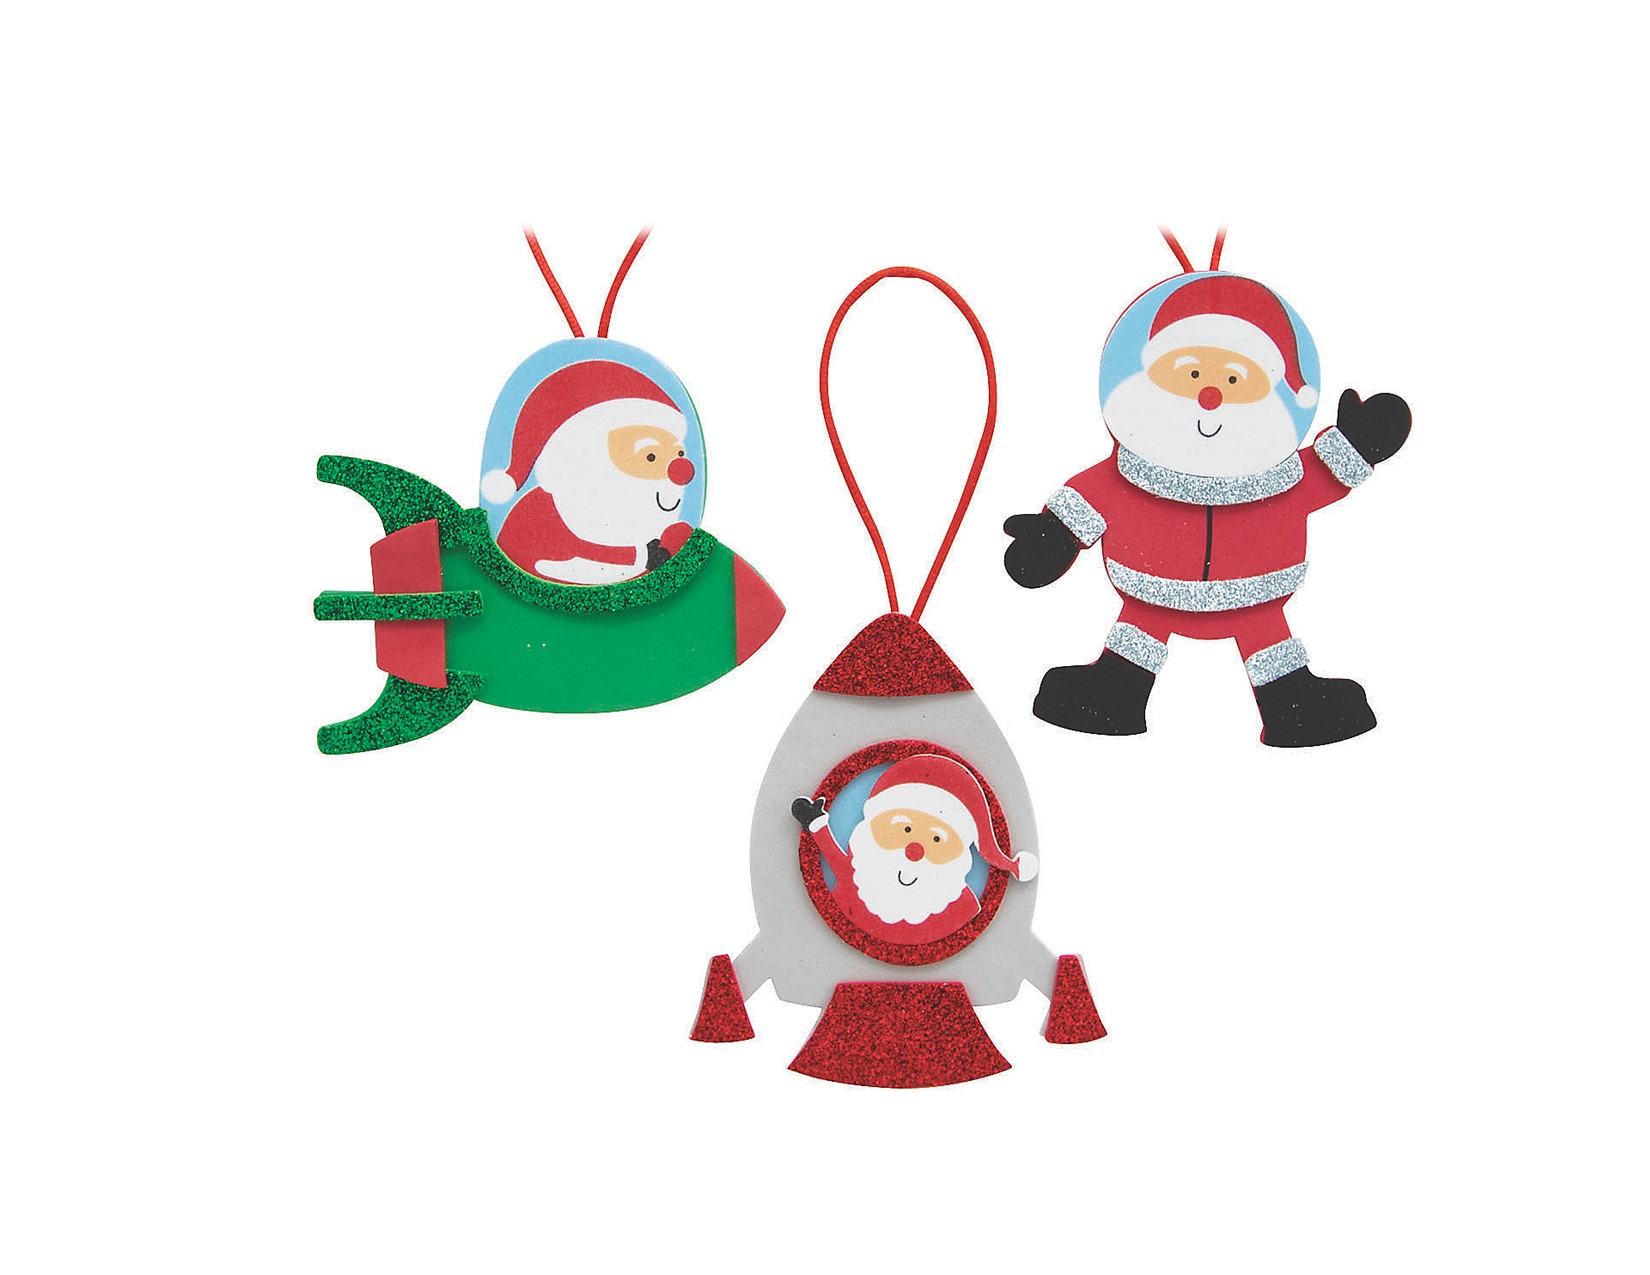 3 santas flying in outer space. one in a red and green rocket, one in a red and white rocket, one in a astronaut hat